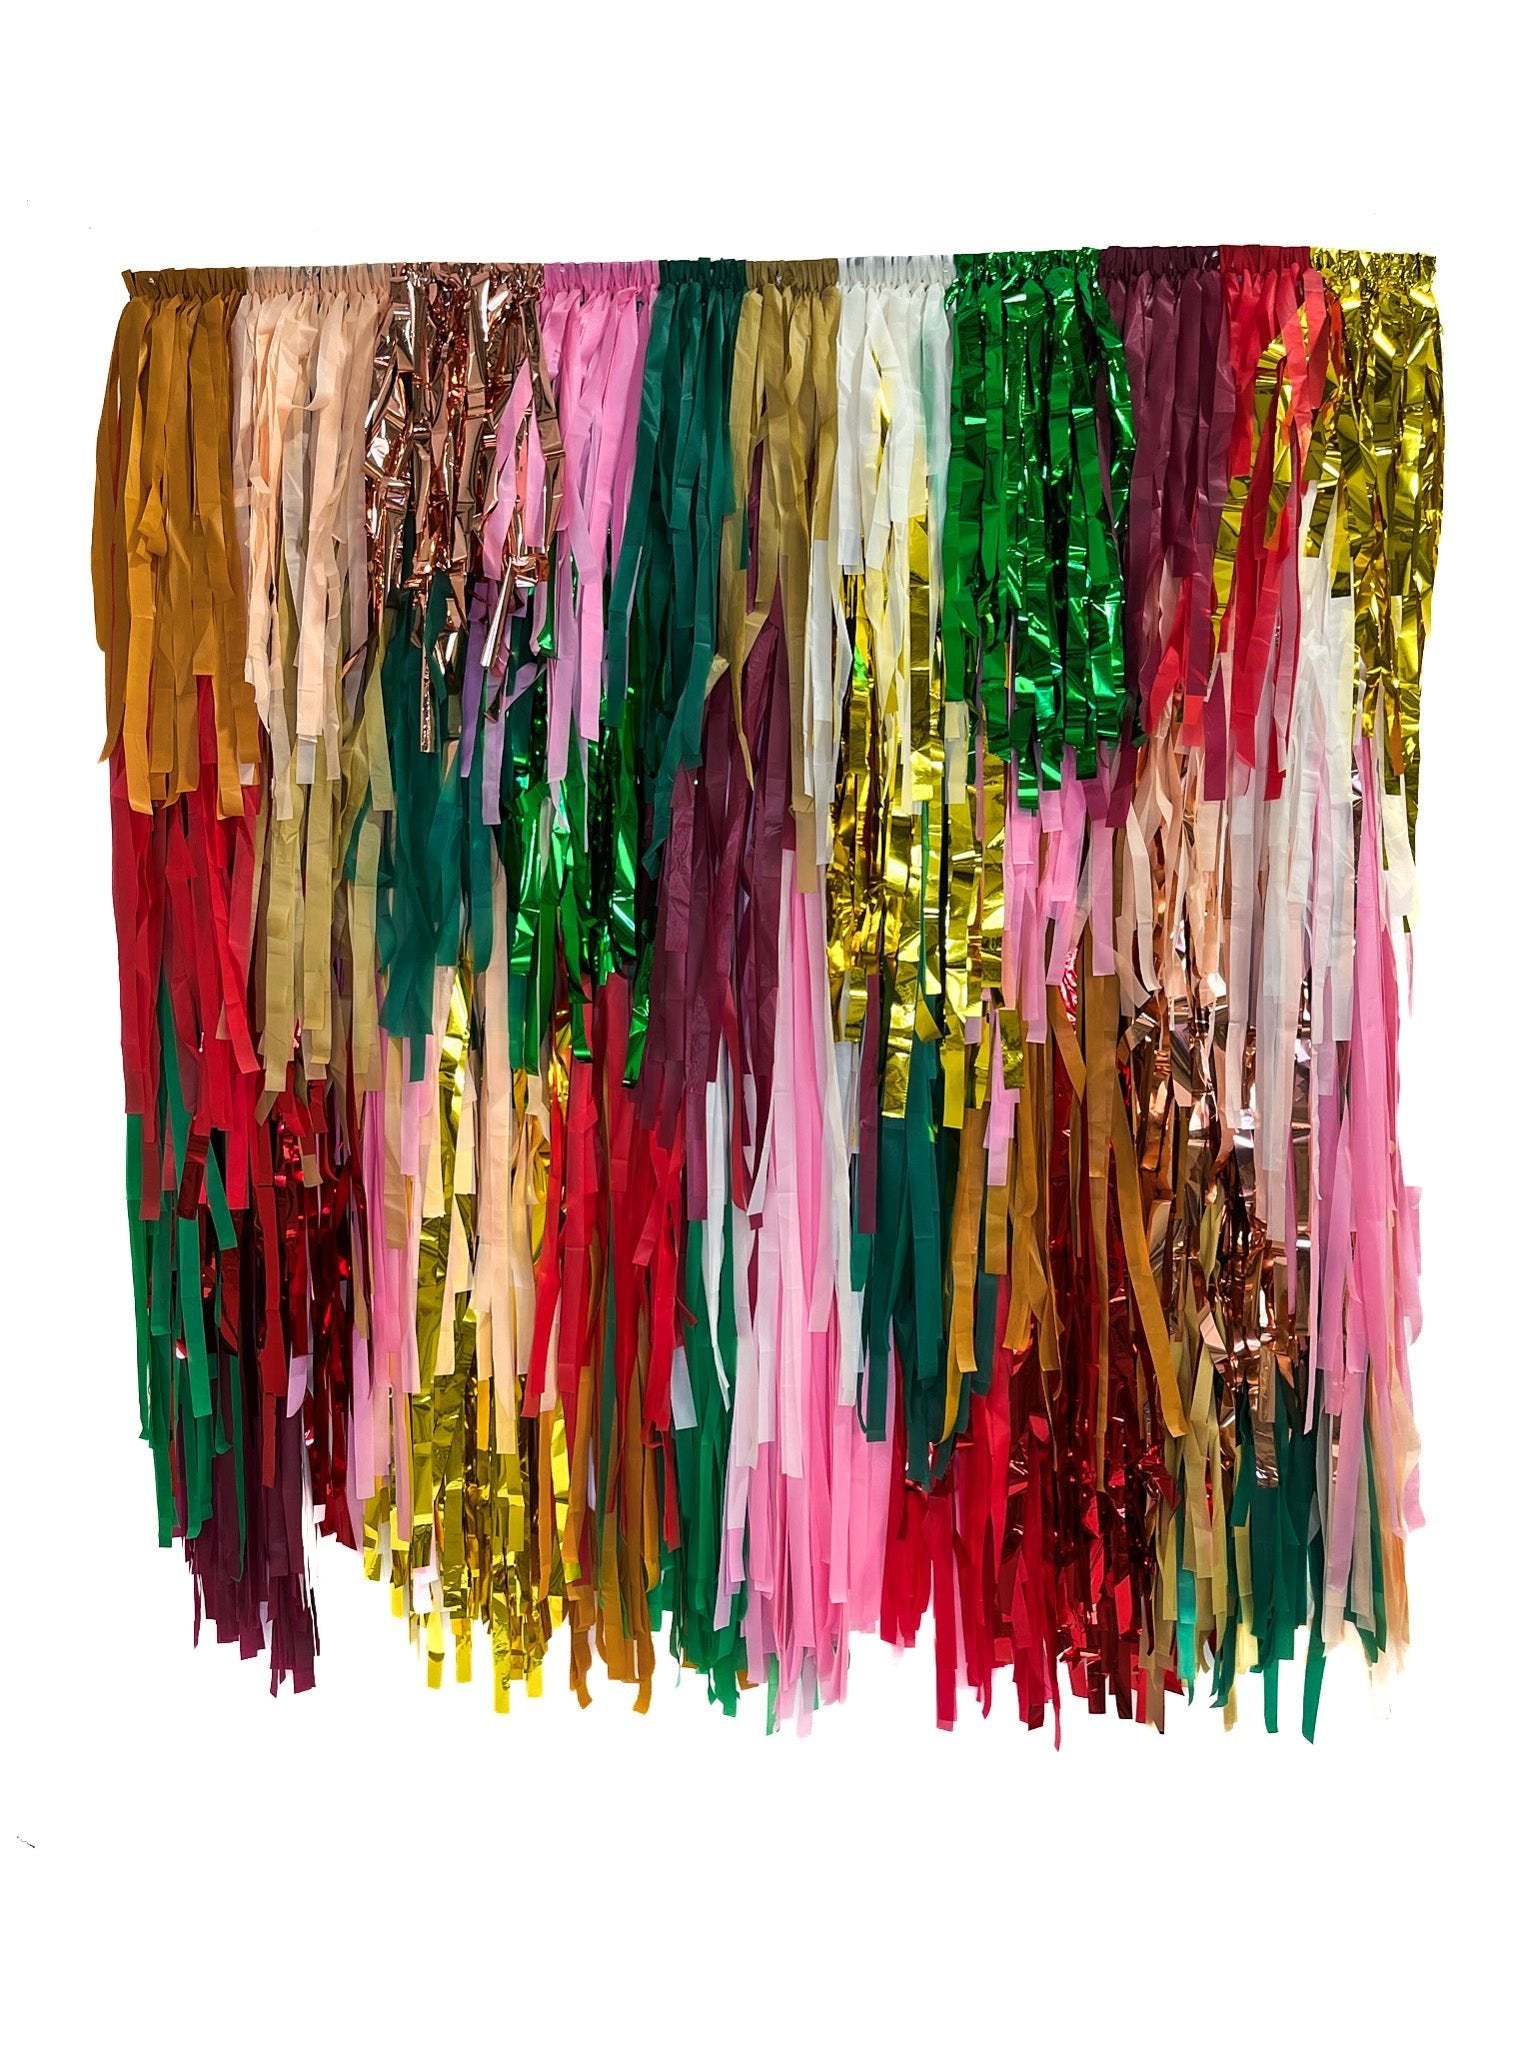 Sugar & Spice Backdrop - Oh My Darling Party Co-bermudaBLUE BACKDROPBLUE BACKDROPS #Fringe_Backdrop#